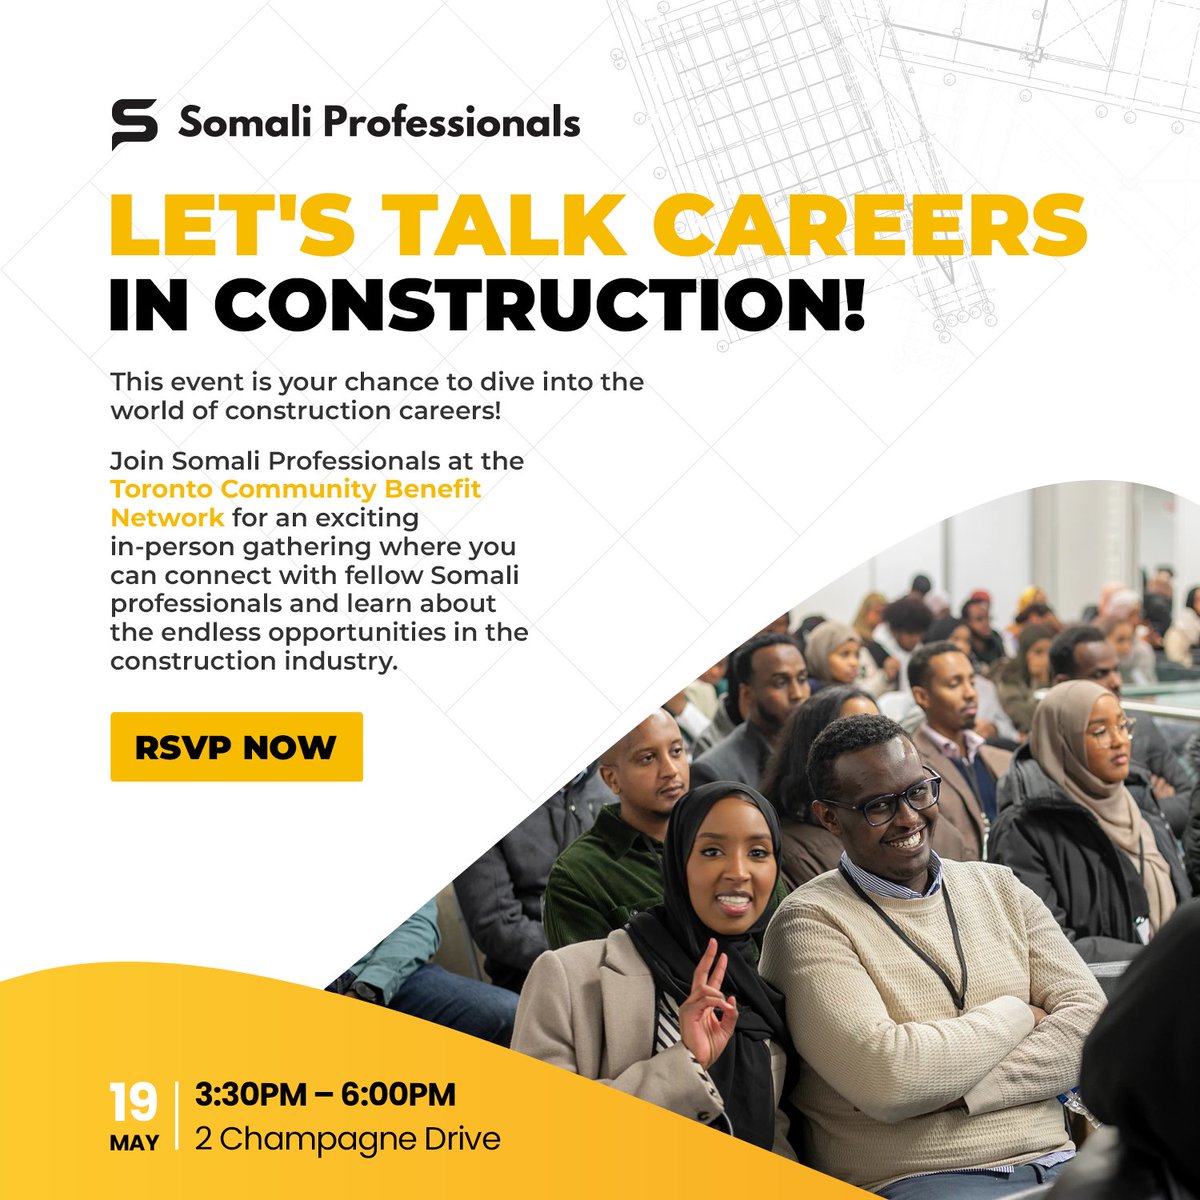 Join @somalicanpro at TCBN for an exciting gathering to connect with fellow Somali professionals and learn about opportunities in the construction industry.

When: May 19, 3:30 PM
Where: 2 Champagne Drive
RSVP: eventbrite.com/e/somali-profe…

#communitybenefits #constructionindustry